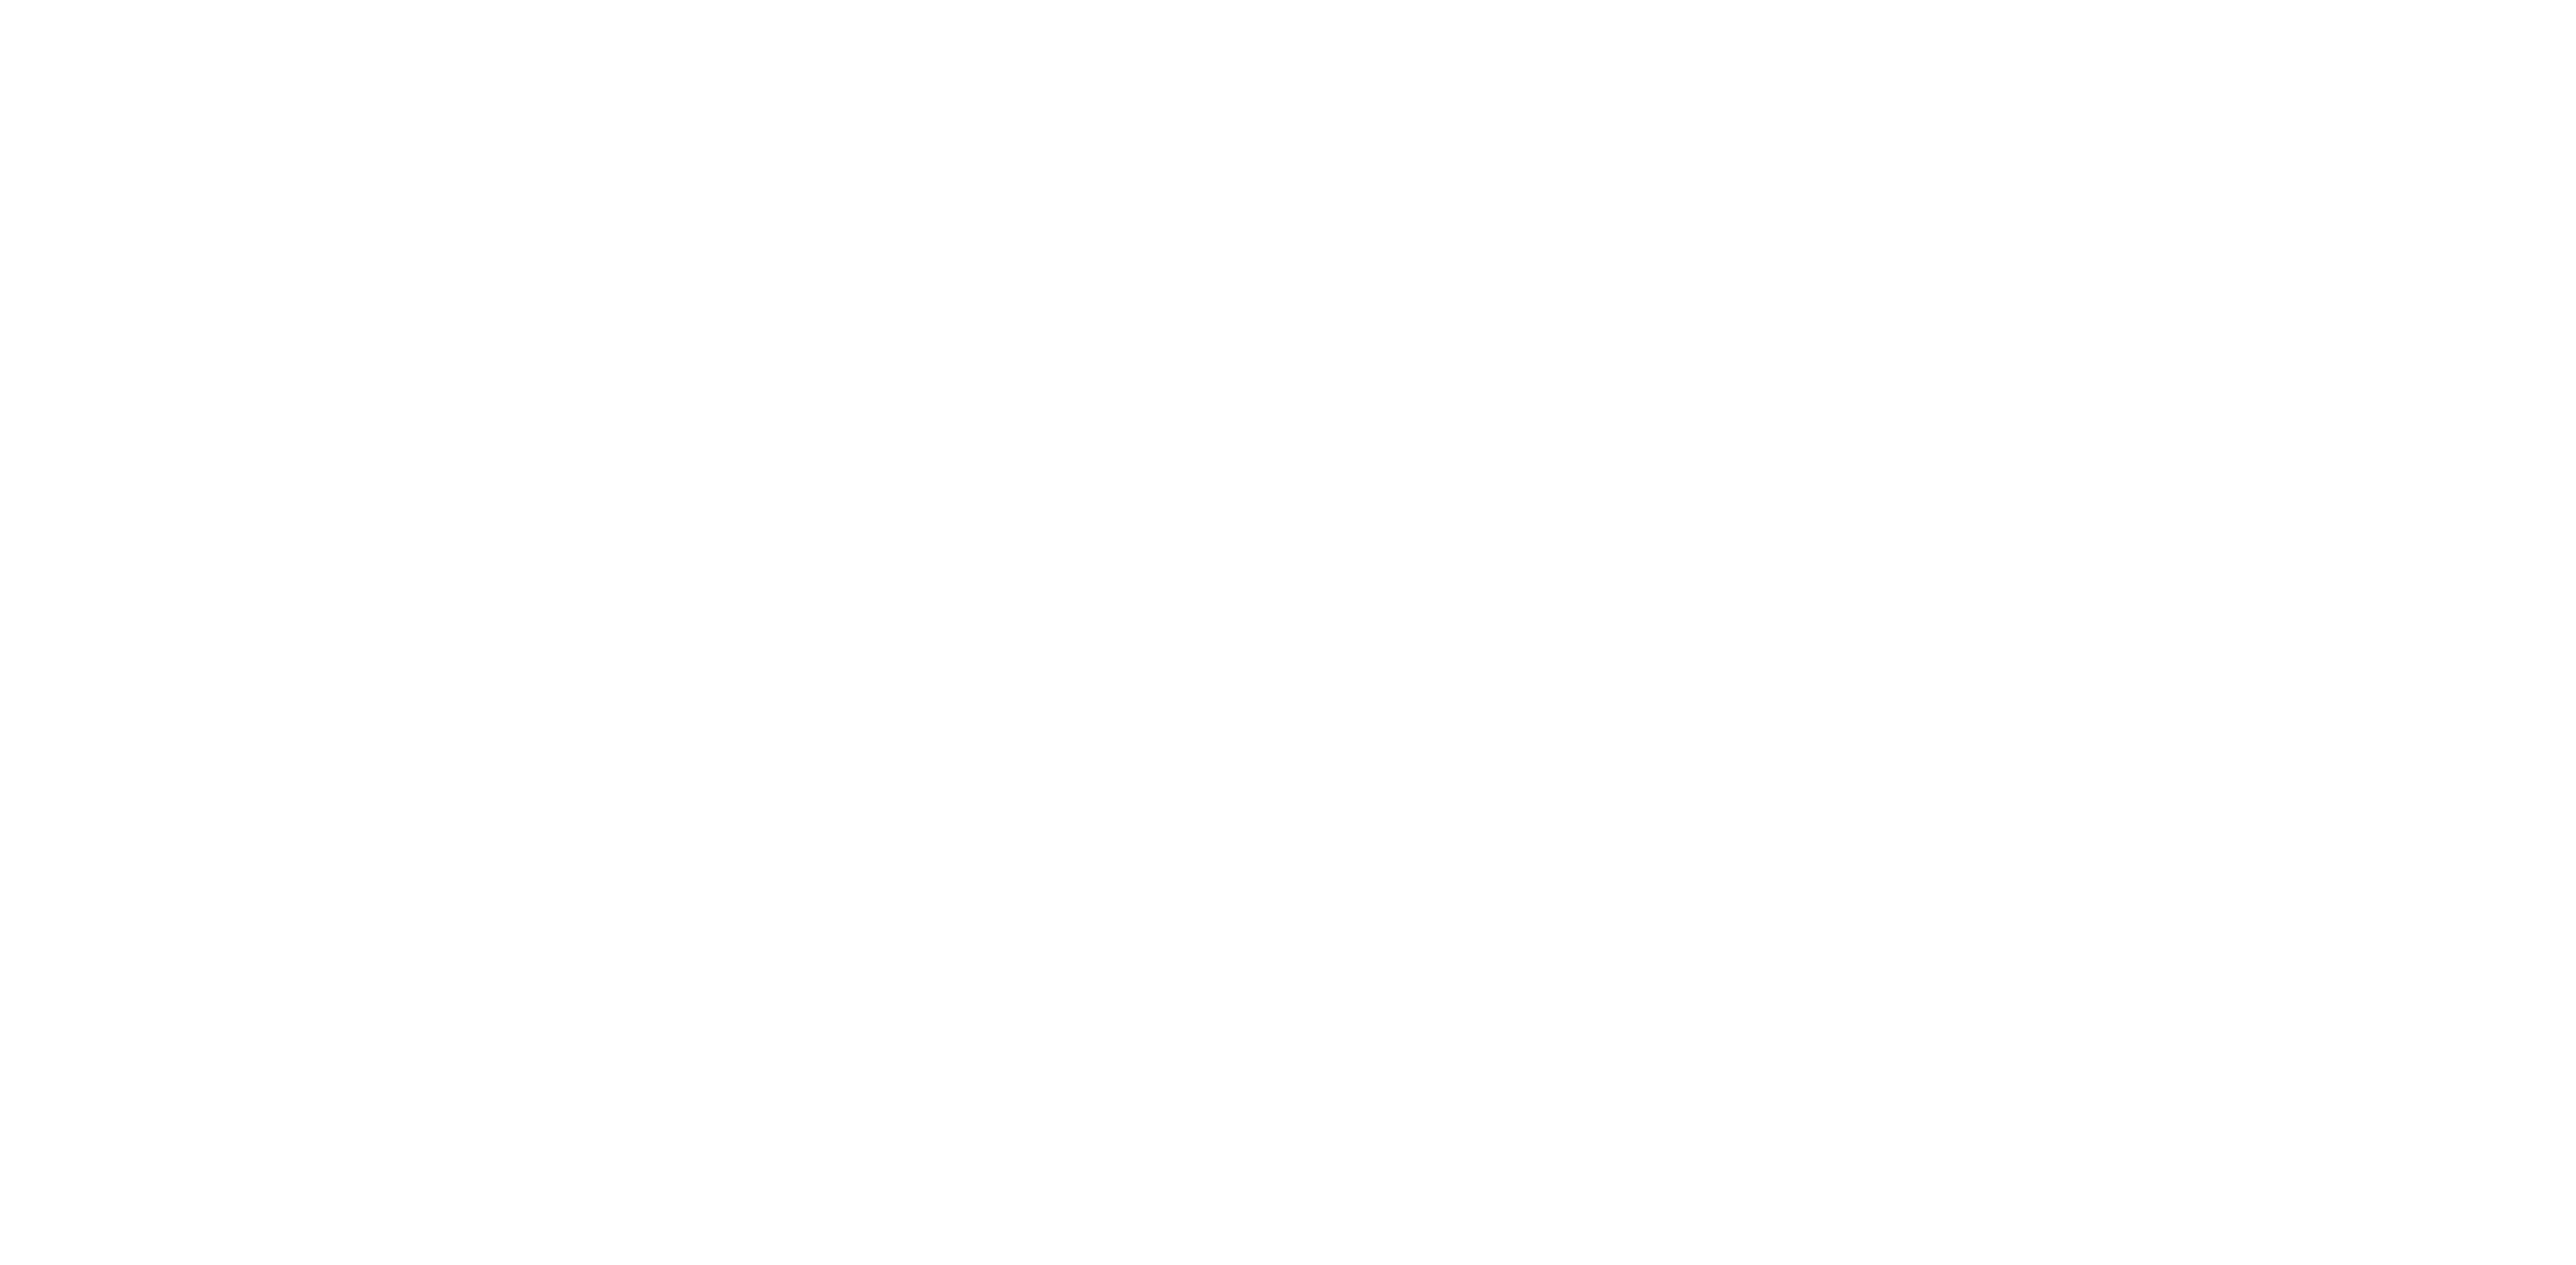 Contato – Global Tracking